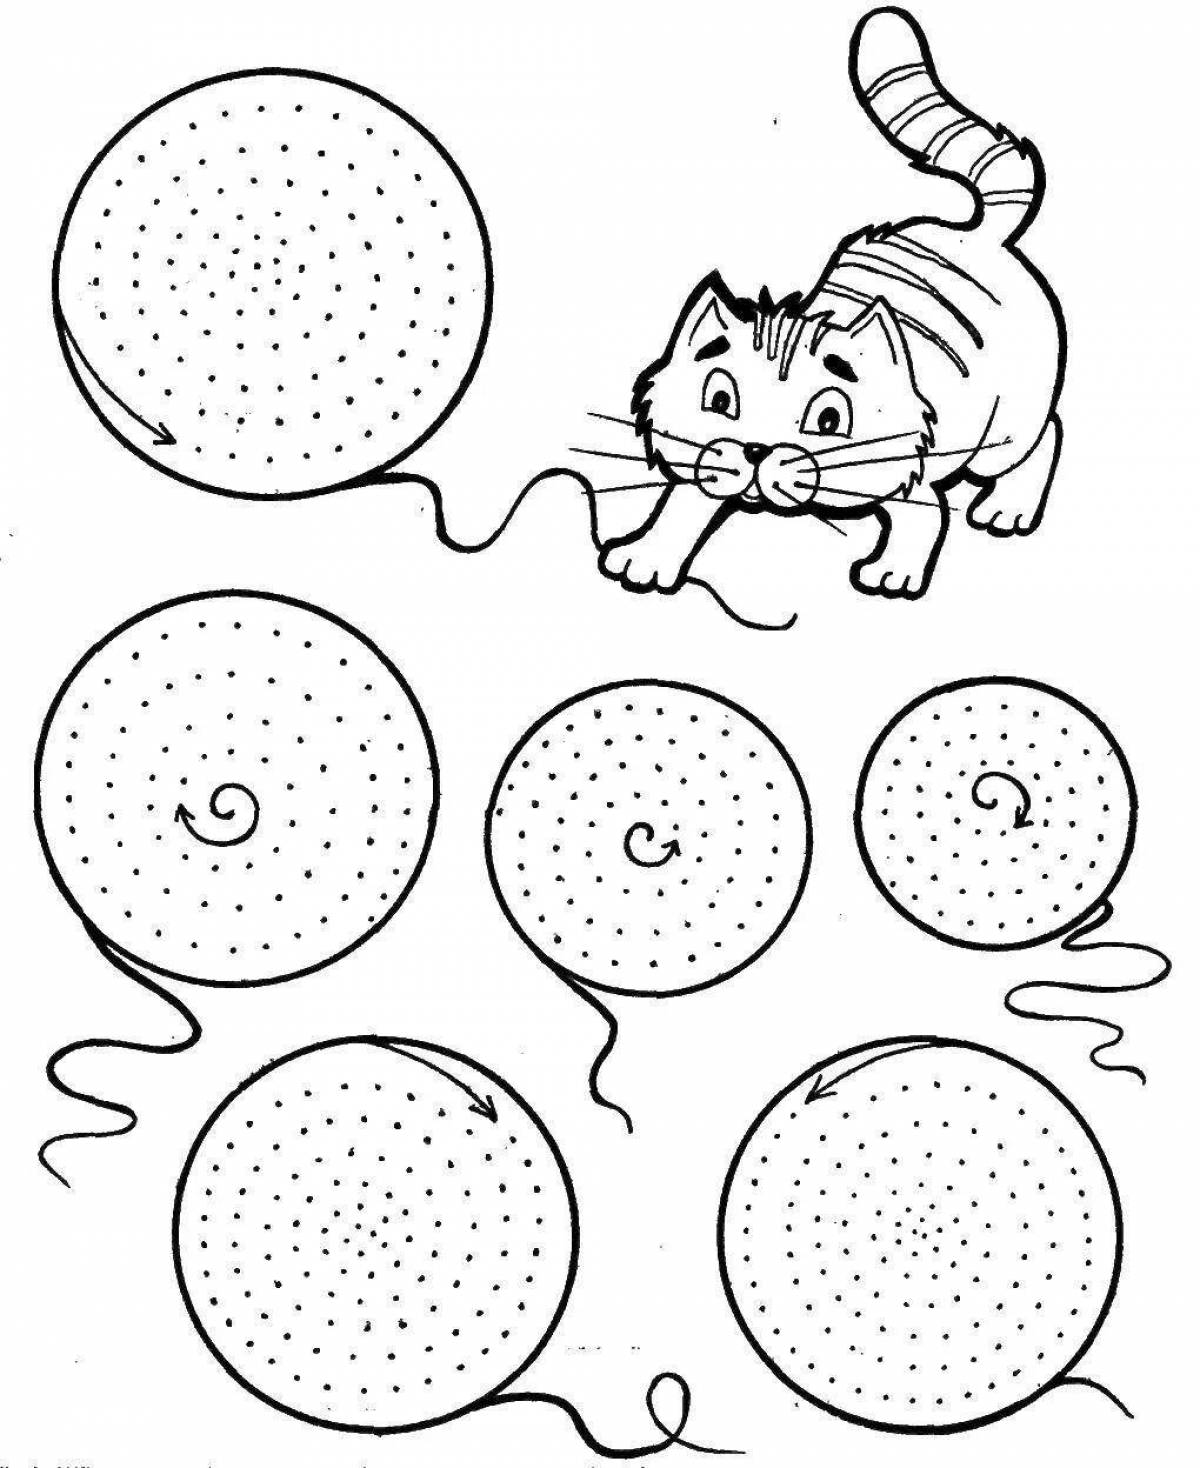 Improved hatching coloring page